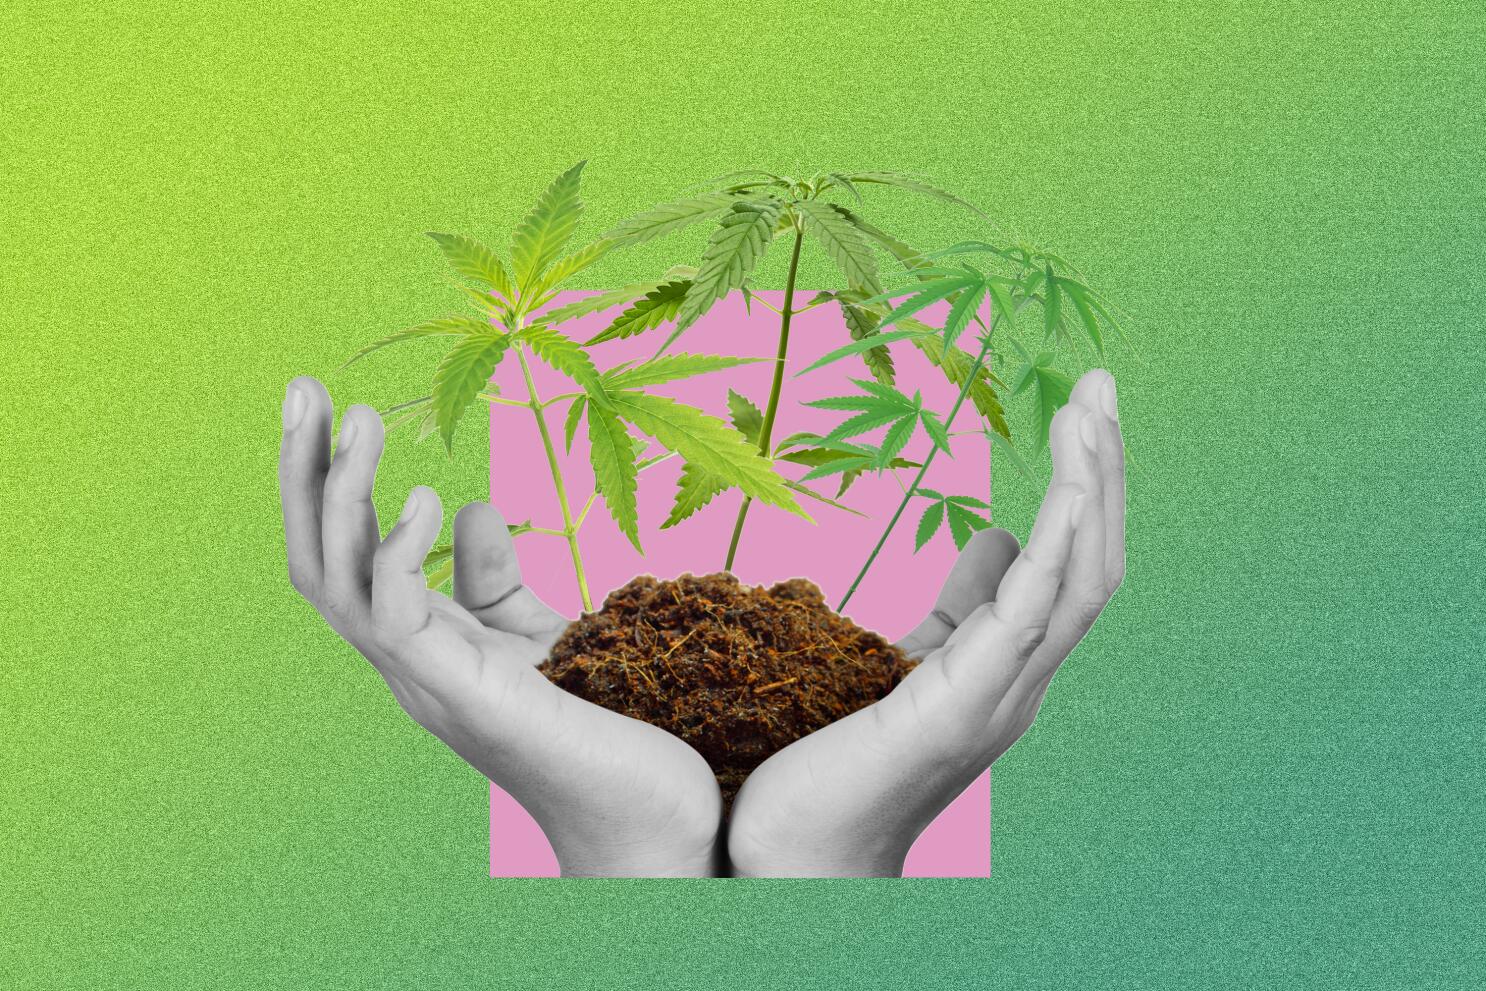 From seed to plant: How to grow your four legal cannabis plants